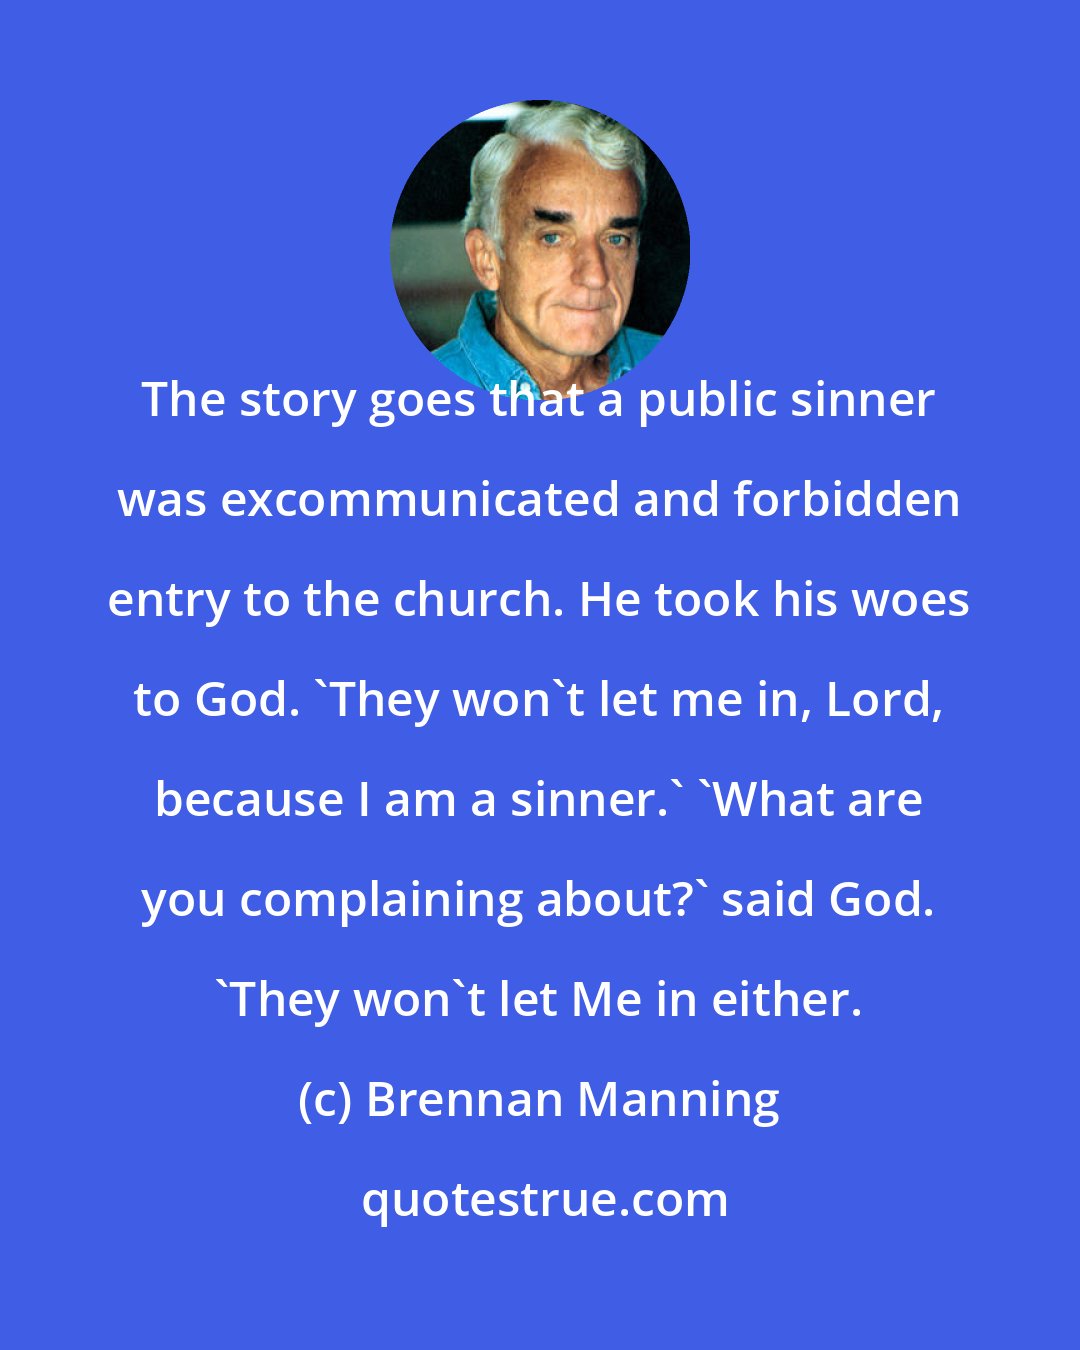 Brennan Manning: The story goes that a public sinner was excommunicated and forbidden entry to the church. He took his woes to God. 'They won't let me in, Lord, because I am a sinner.' 'What are you complaining about?' said God. 'They won't let Me in either.